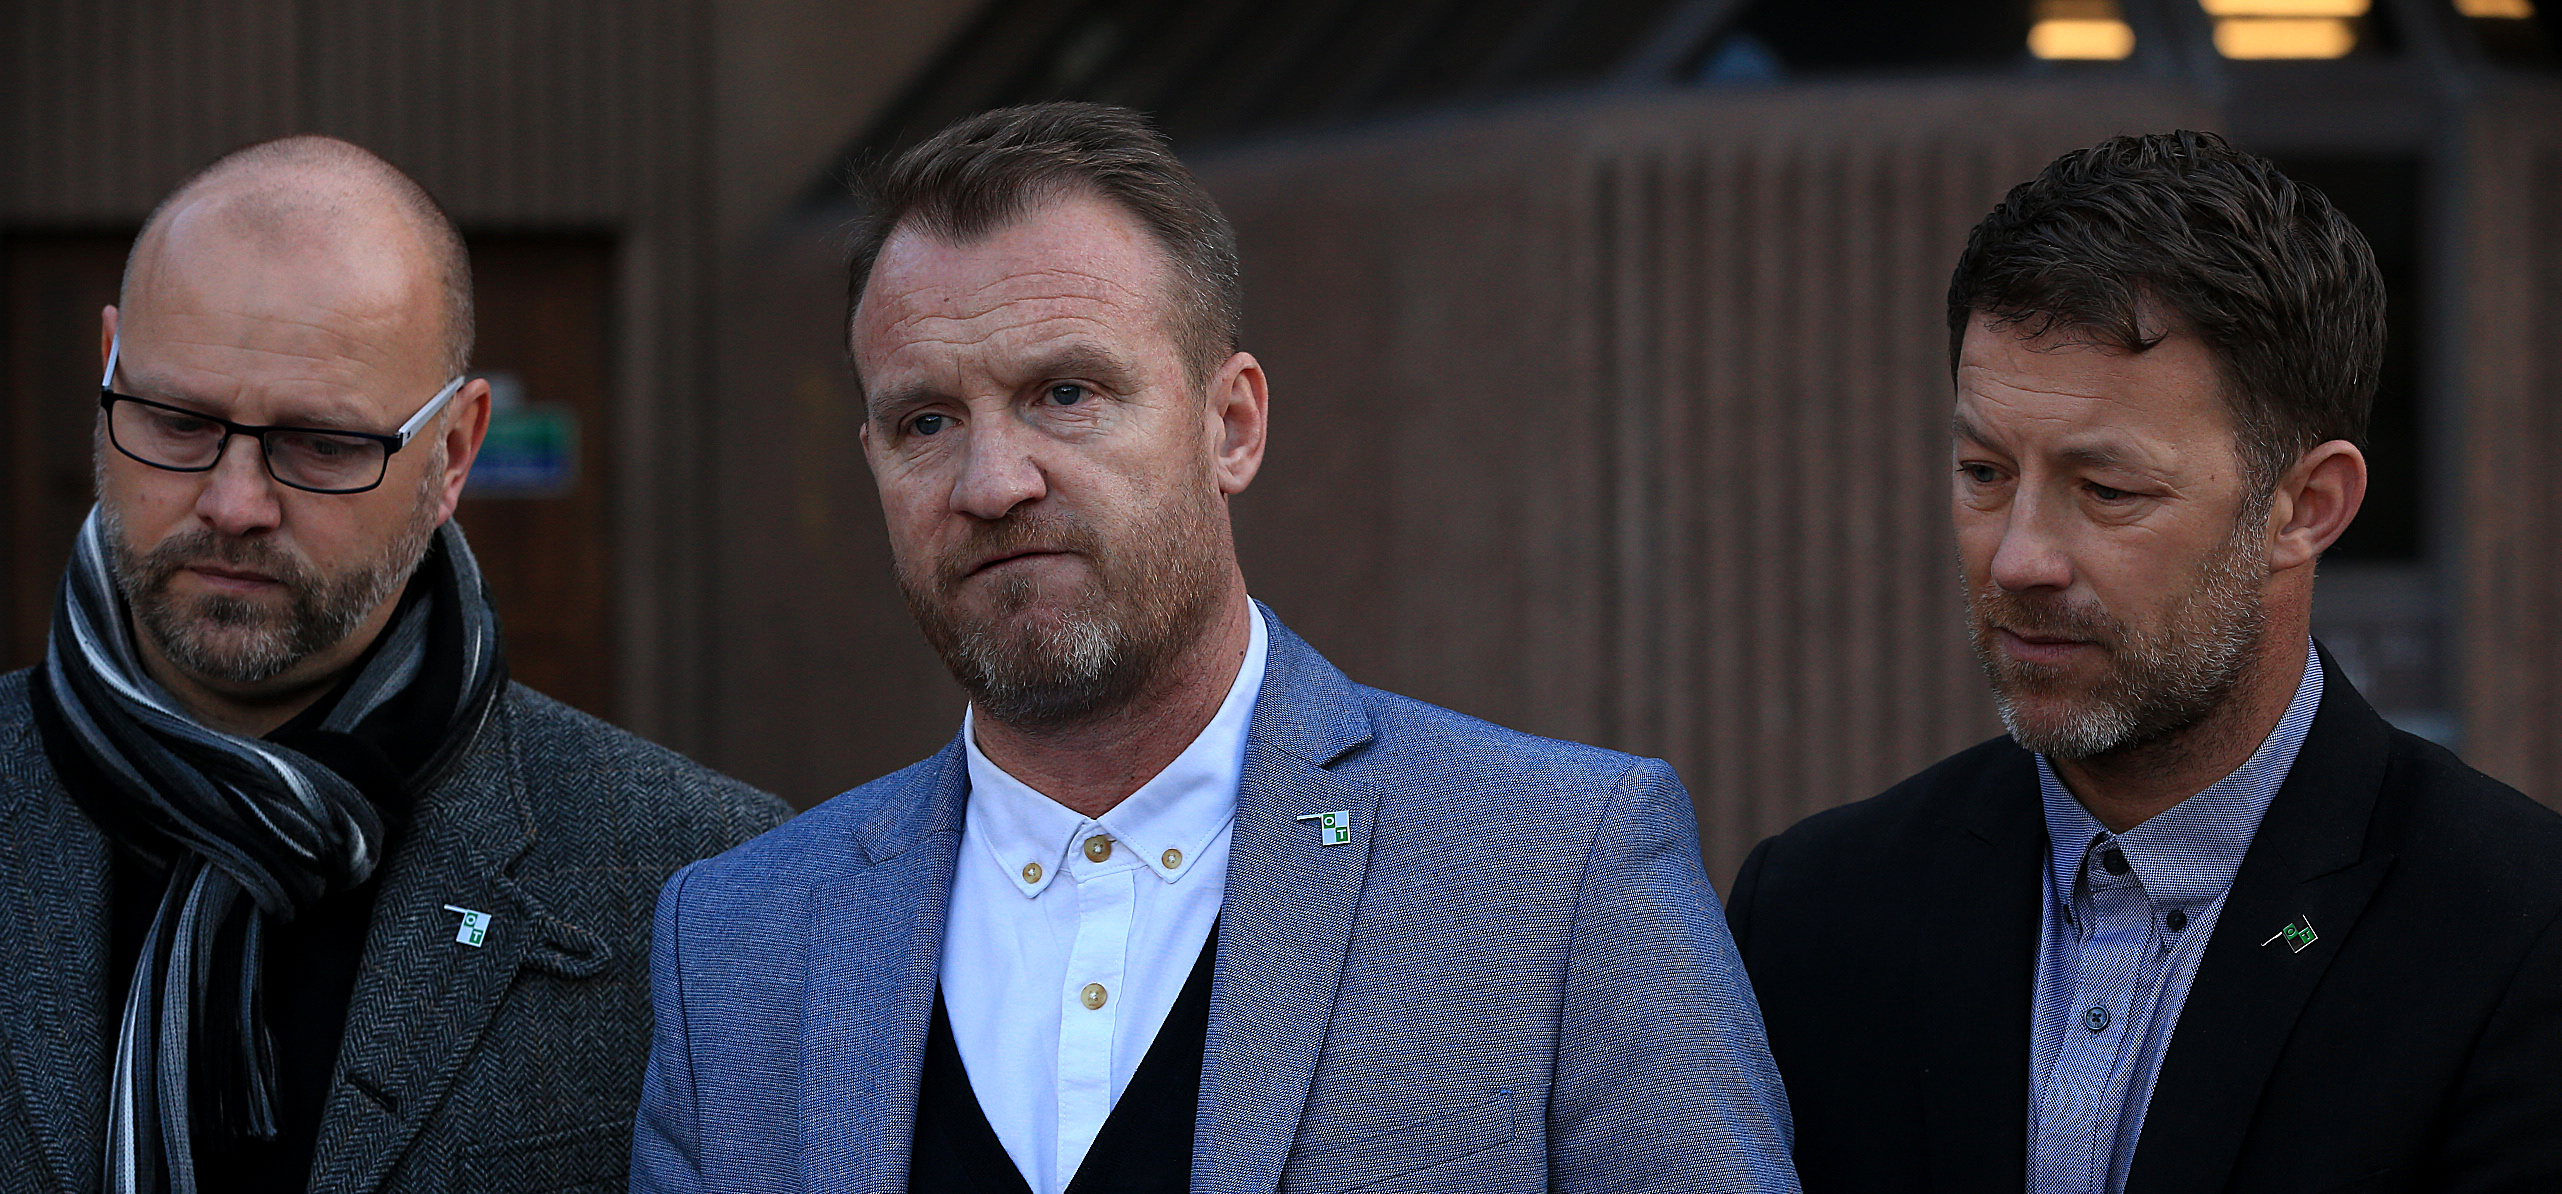 Chris Unsworth (left), Micky Fallon (centre) and Steve Walters (right), victims of Barry Bennell, speak to the media outside Liverpool Crown Court where the serial paedophile was convicted of abusing more young footballers. (Peter Byrne/PA)